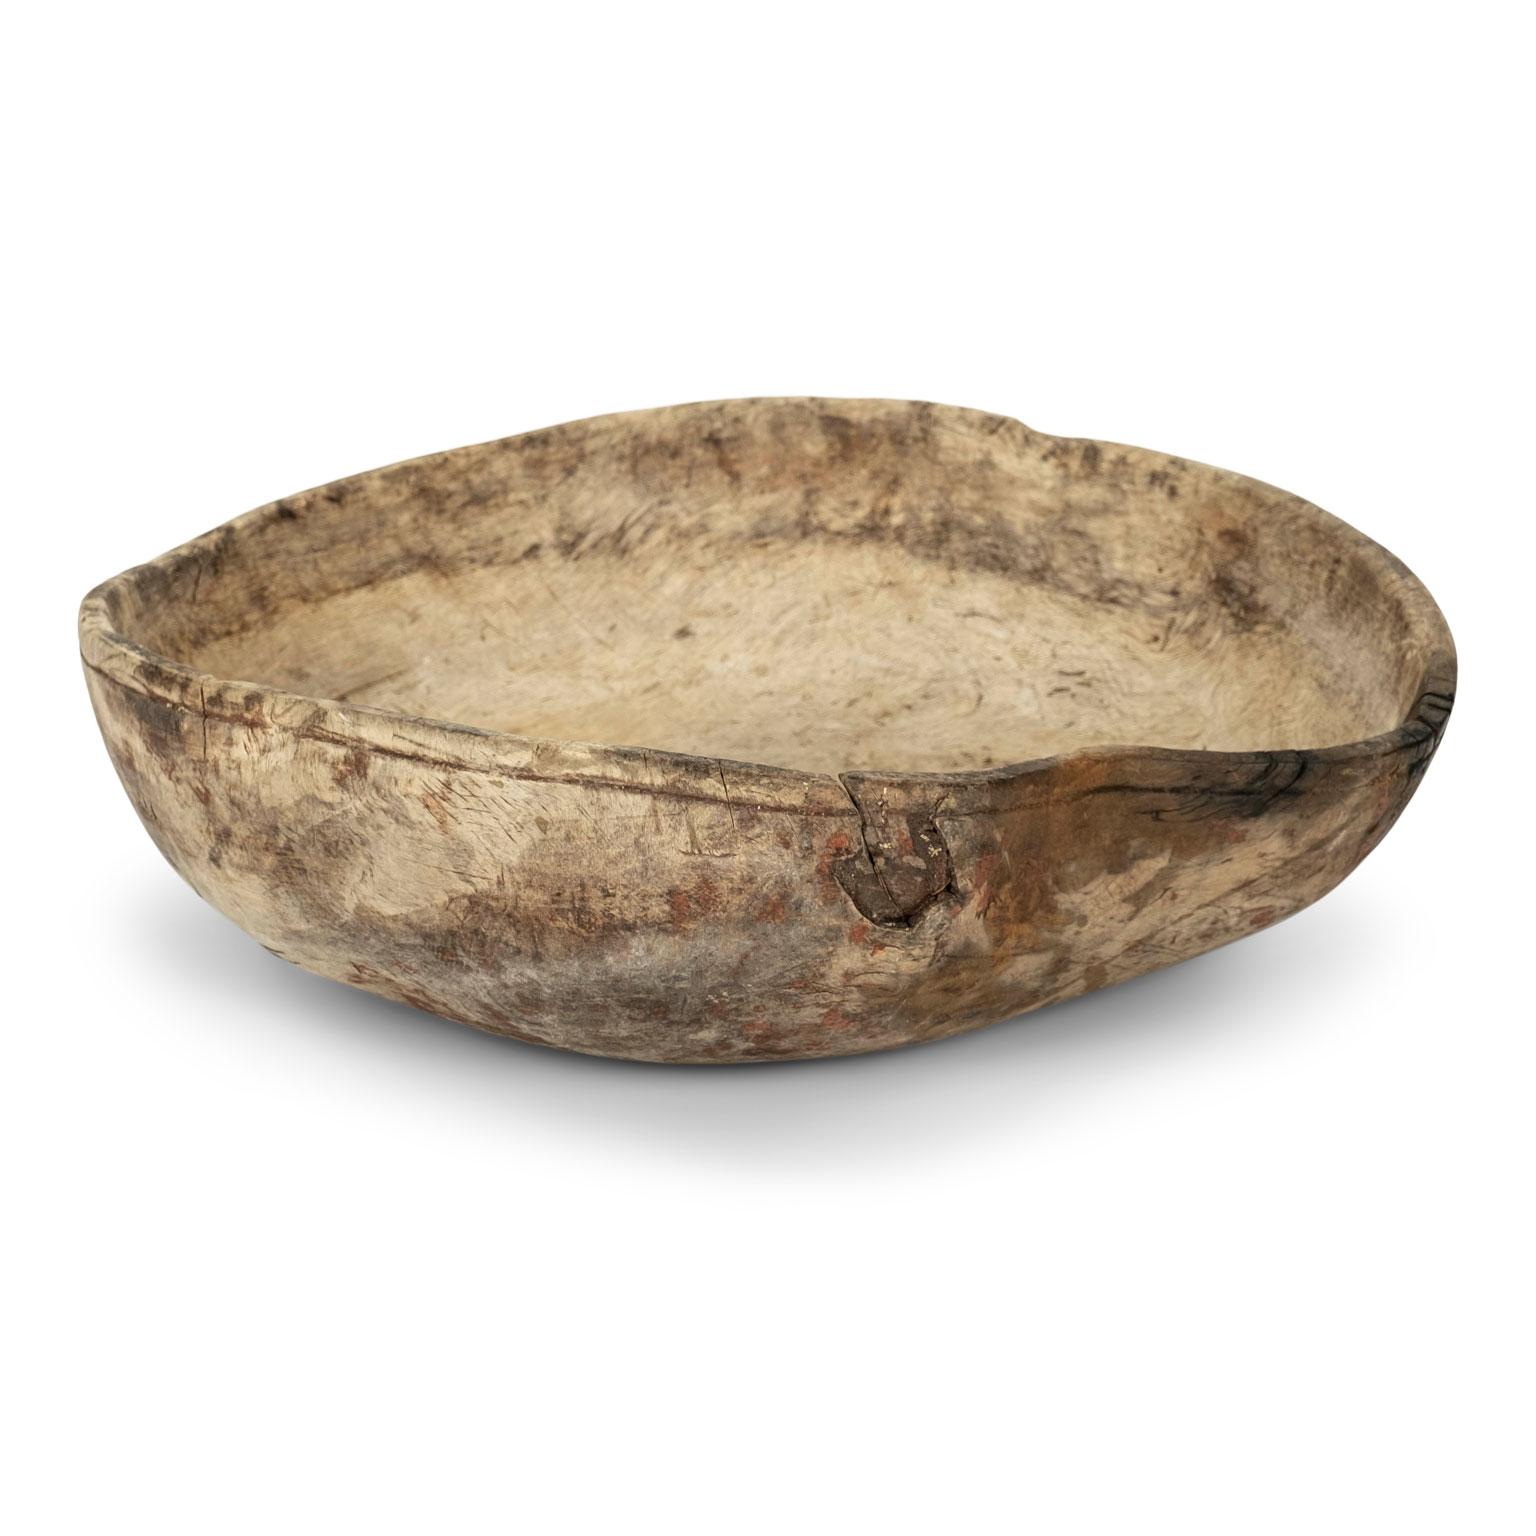 Irregular-shaped hand-carved Swedish root bowl dating to the 19th century.